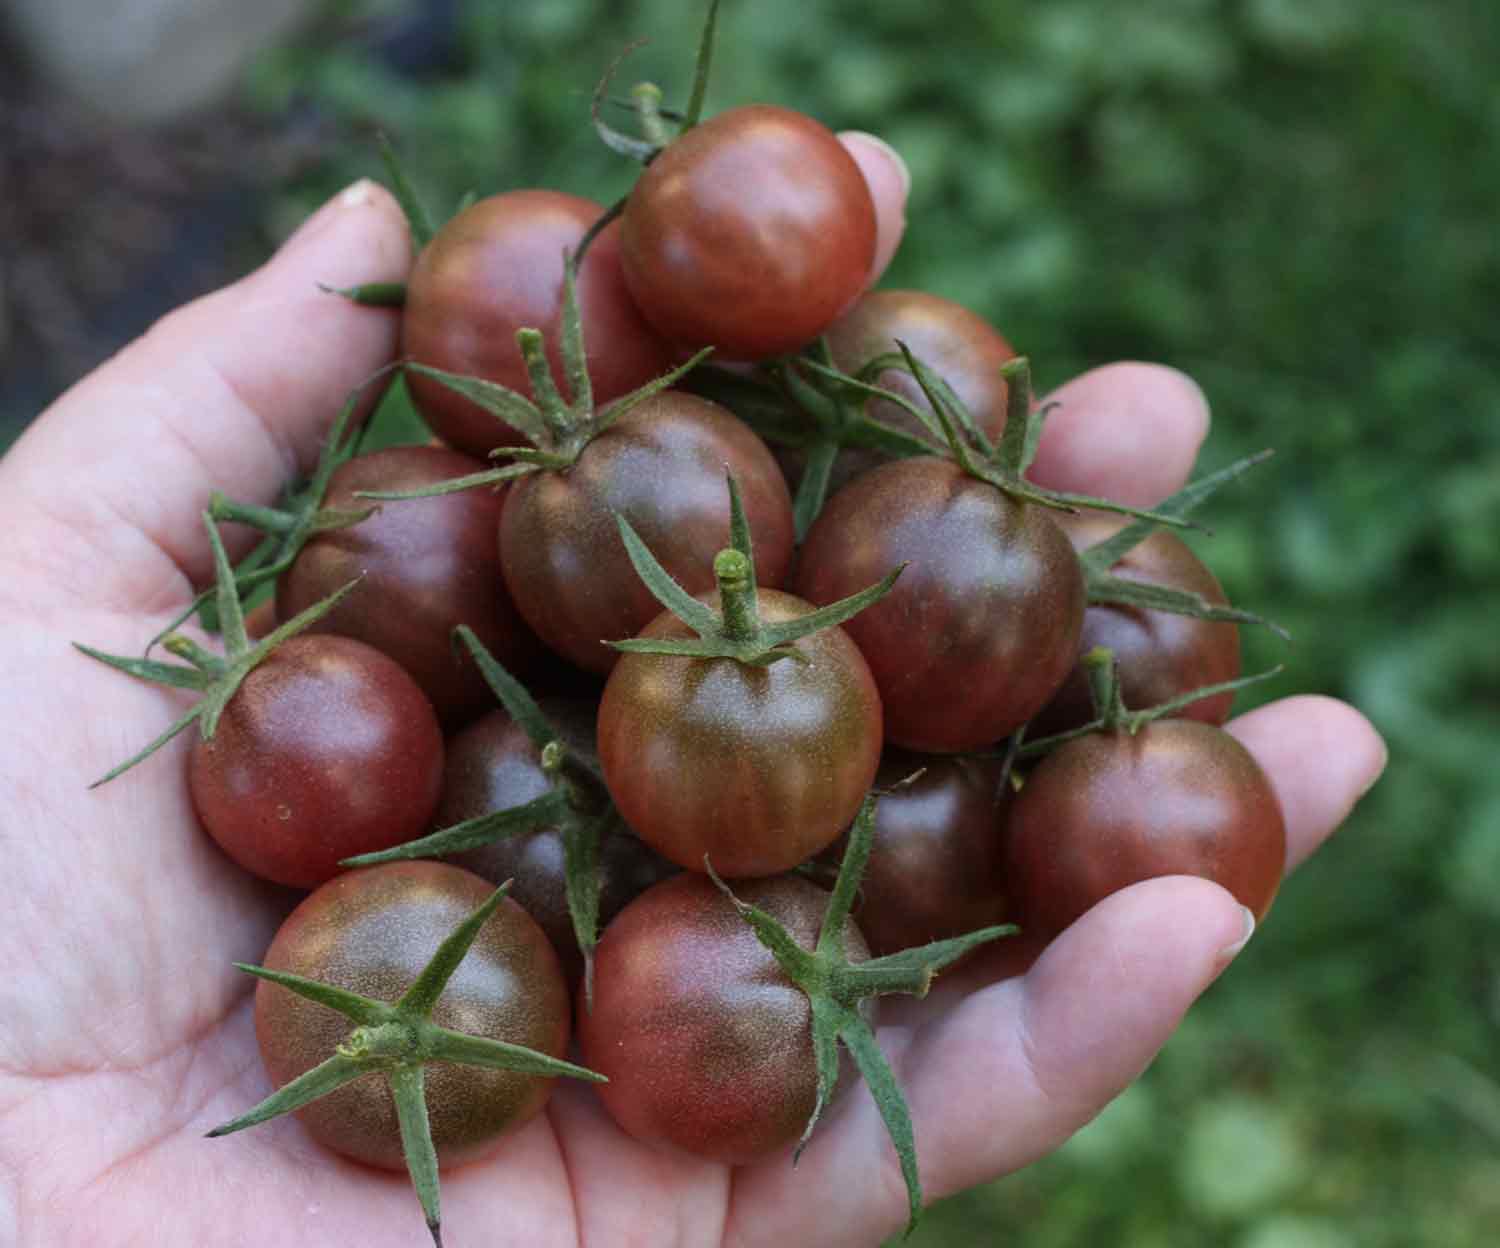 A hand holding freshly picked Black Cherry tomatoes.